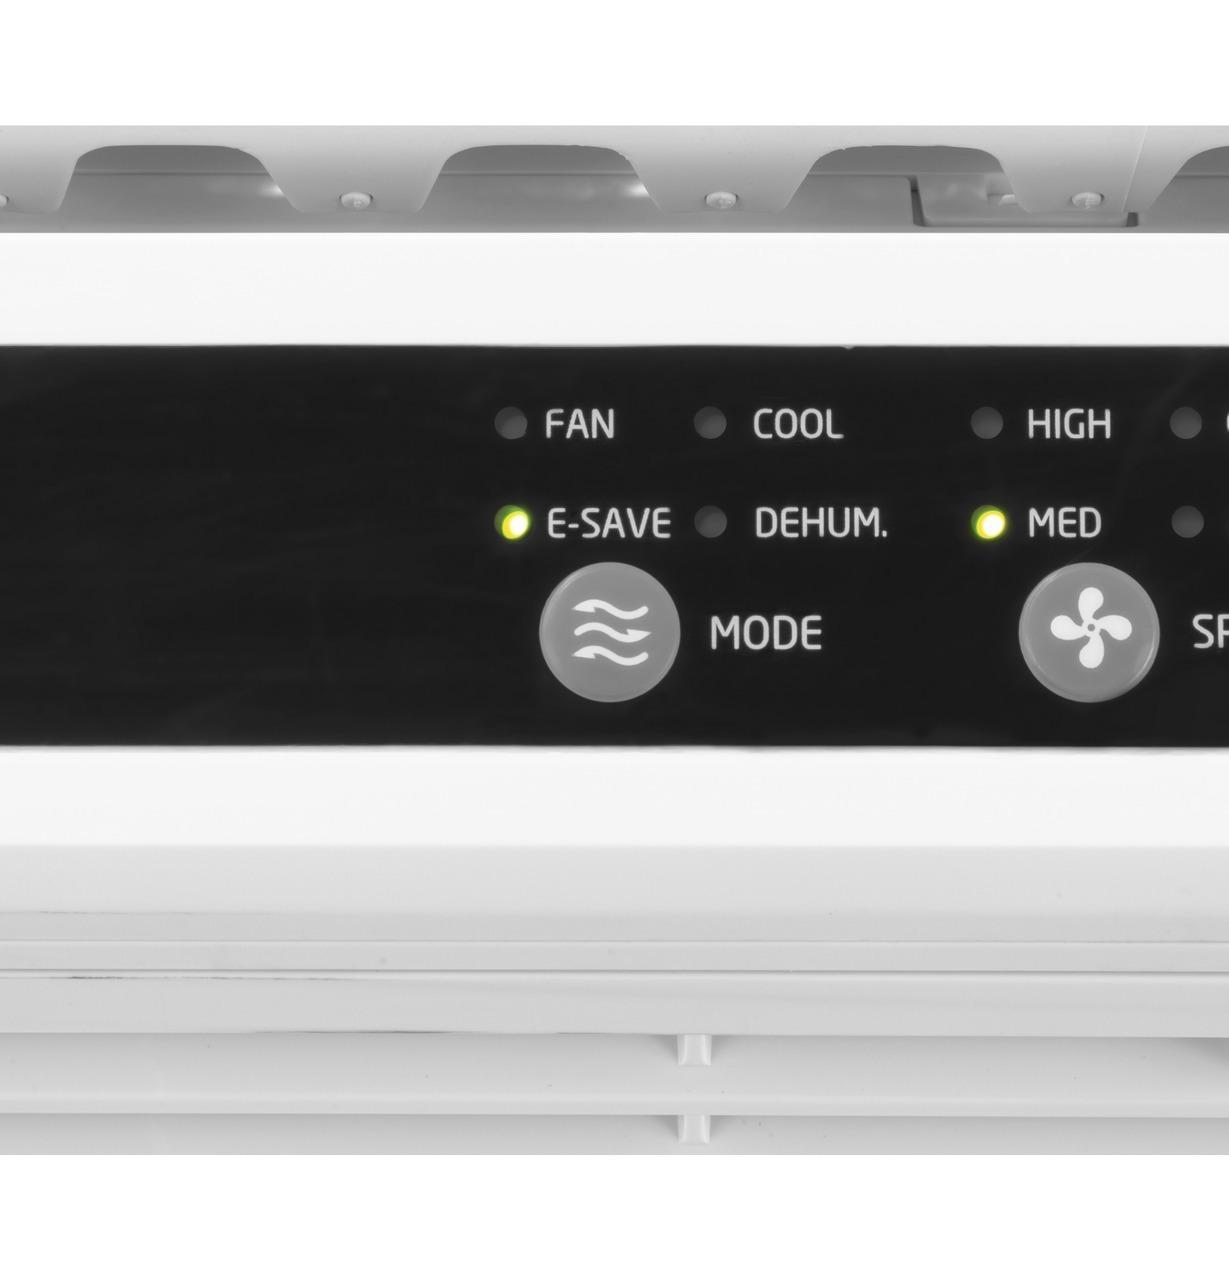 Haier ENERGY STAR® 6,200 BTU Ultra Quiet Window Air Conditioner for Small Rooms up to 250 sq. ft.